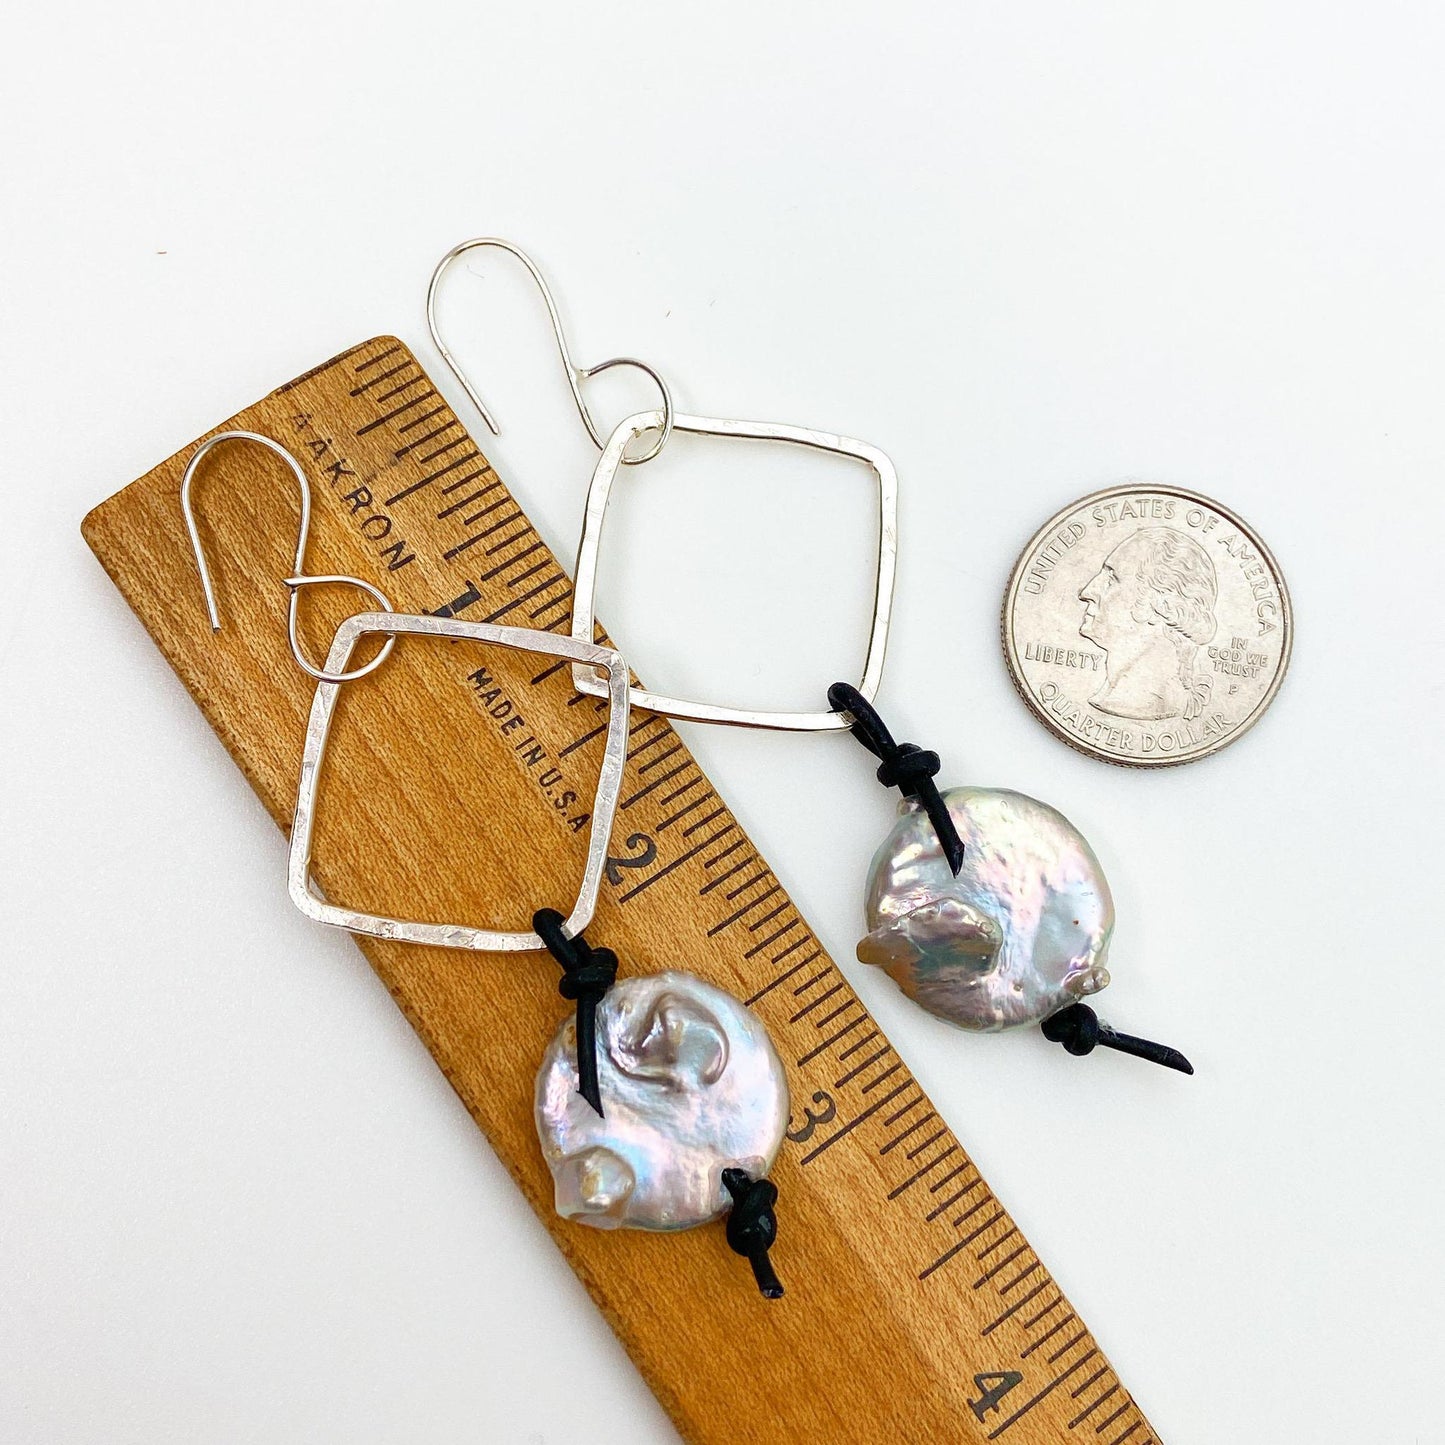 Earrings - Coin Pearl with Sterling Diamonds and Leather